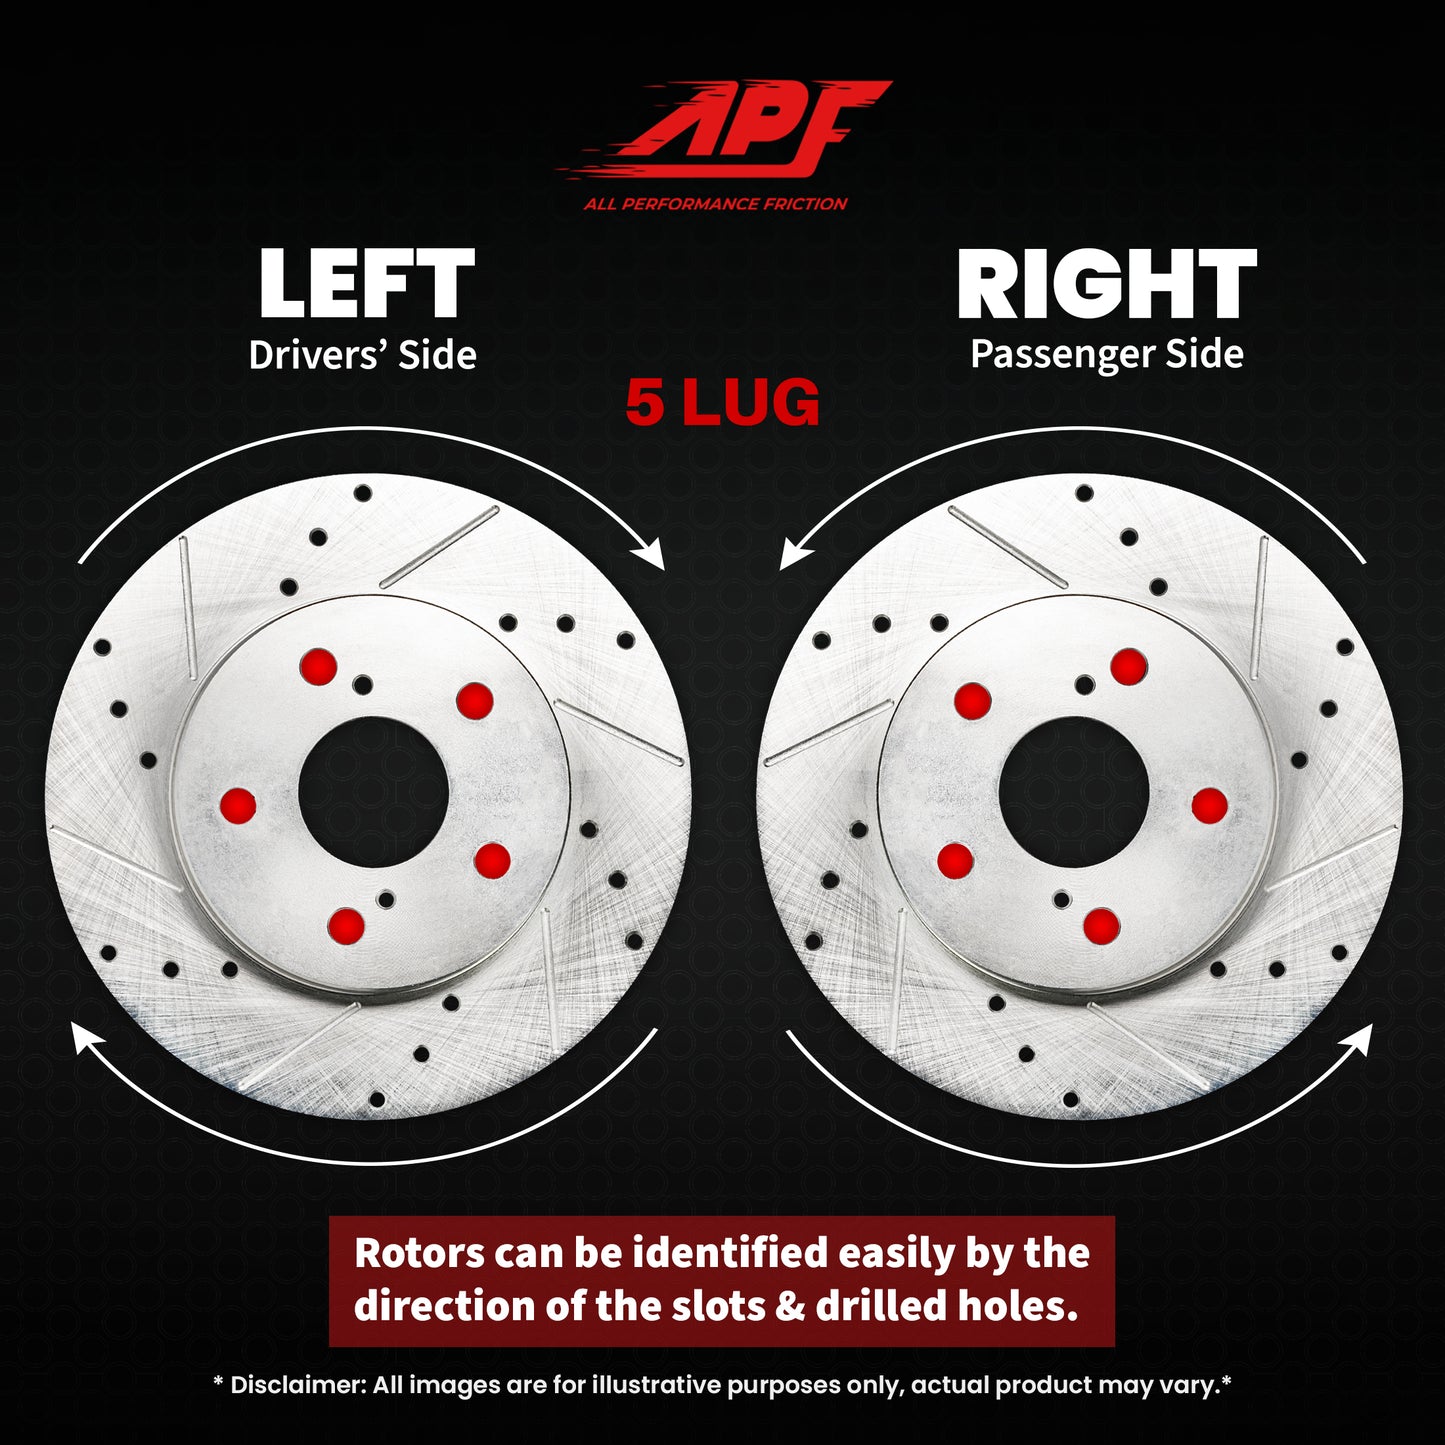 APF All Performance Friction Front and Rear Rotors and Pads Full Kit compatible with GMC Sierra 1500 2014-2018 Zinc Drilled Slotted Rotors with Ceramic Carbon Fiber Brake Pads | $719.07